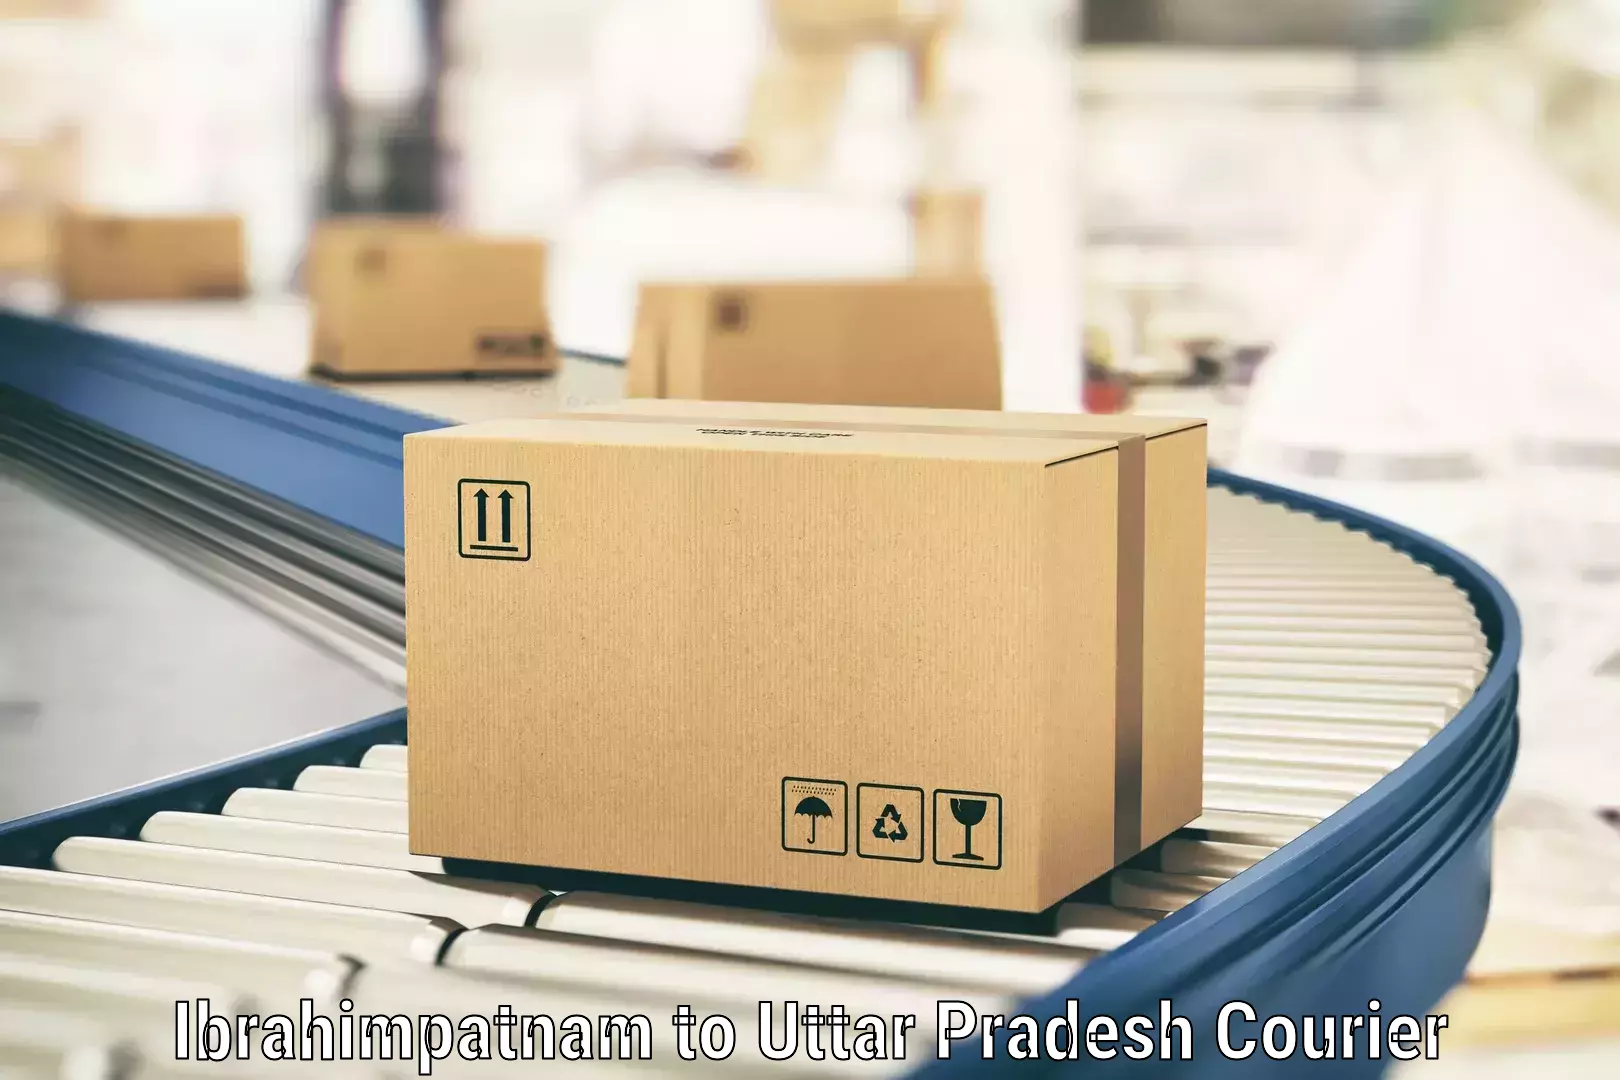 Reliable freight solutions in Ibrahimpatnam to Mahasi